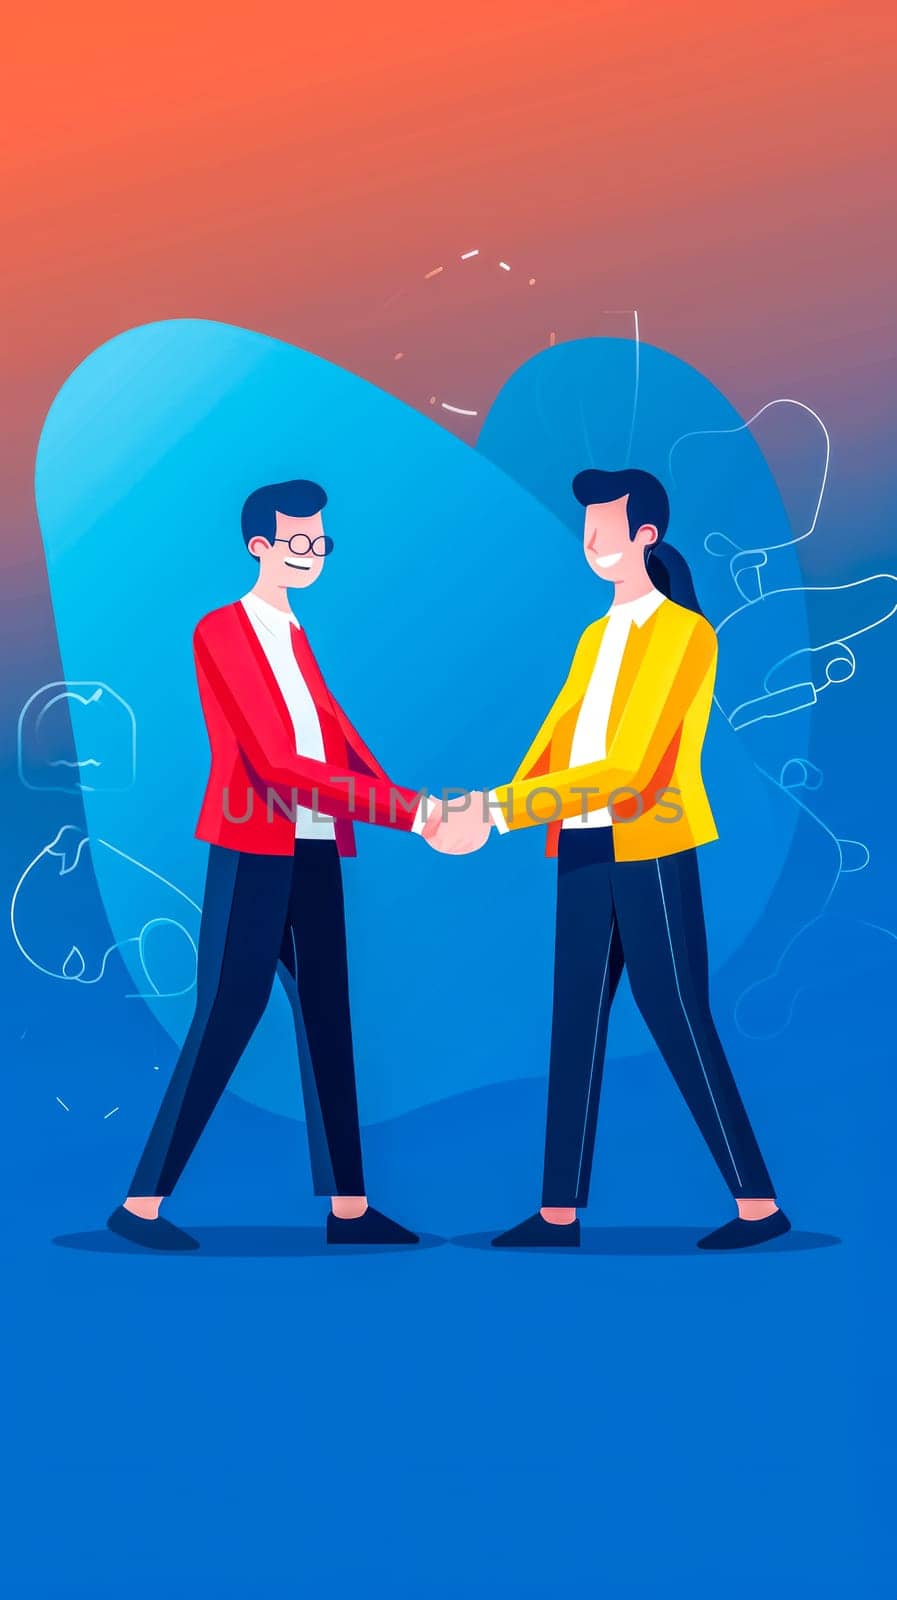 two stylized people in suits shaking hands, one wearing glasses and a red jacket, the other in a yellow jacket, against a gradient blue to red background with abstract shapes. vertical